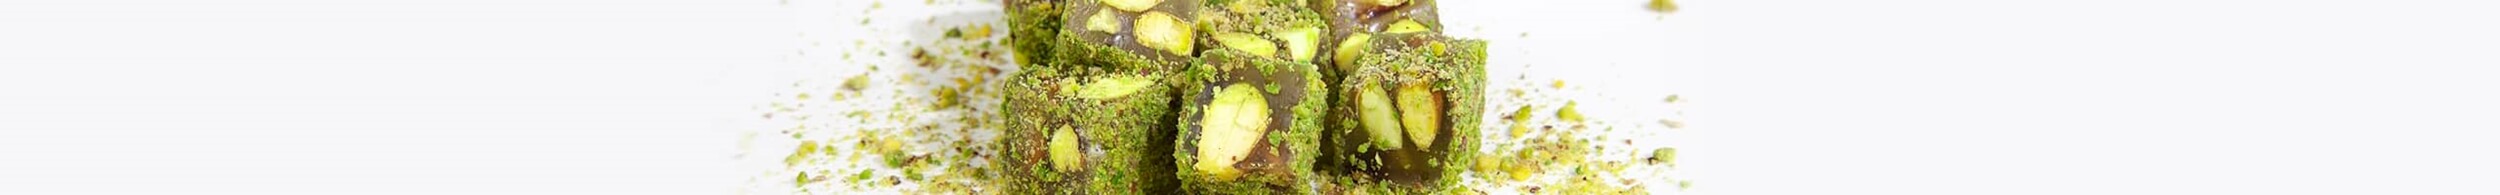 Extra Pistachios Double Roasted Turkish Delights